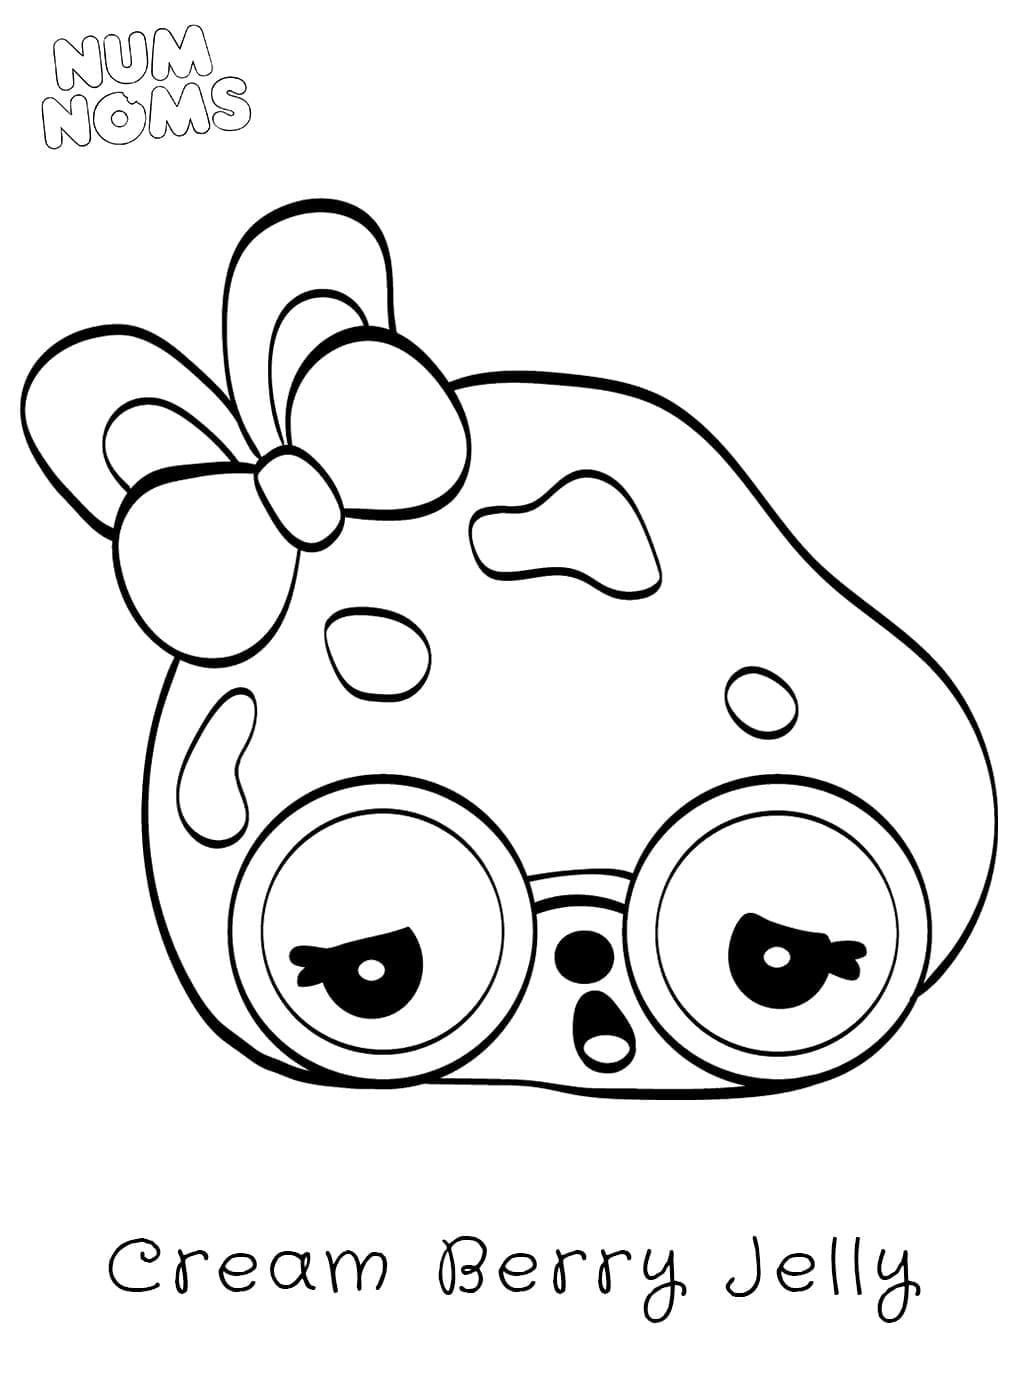 Num Noms Cream Berry Jelly coloring page